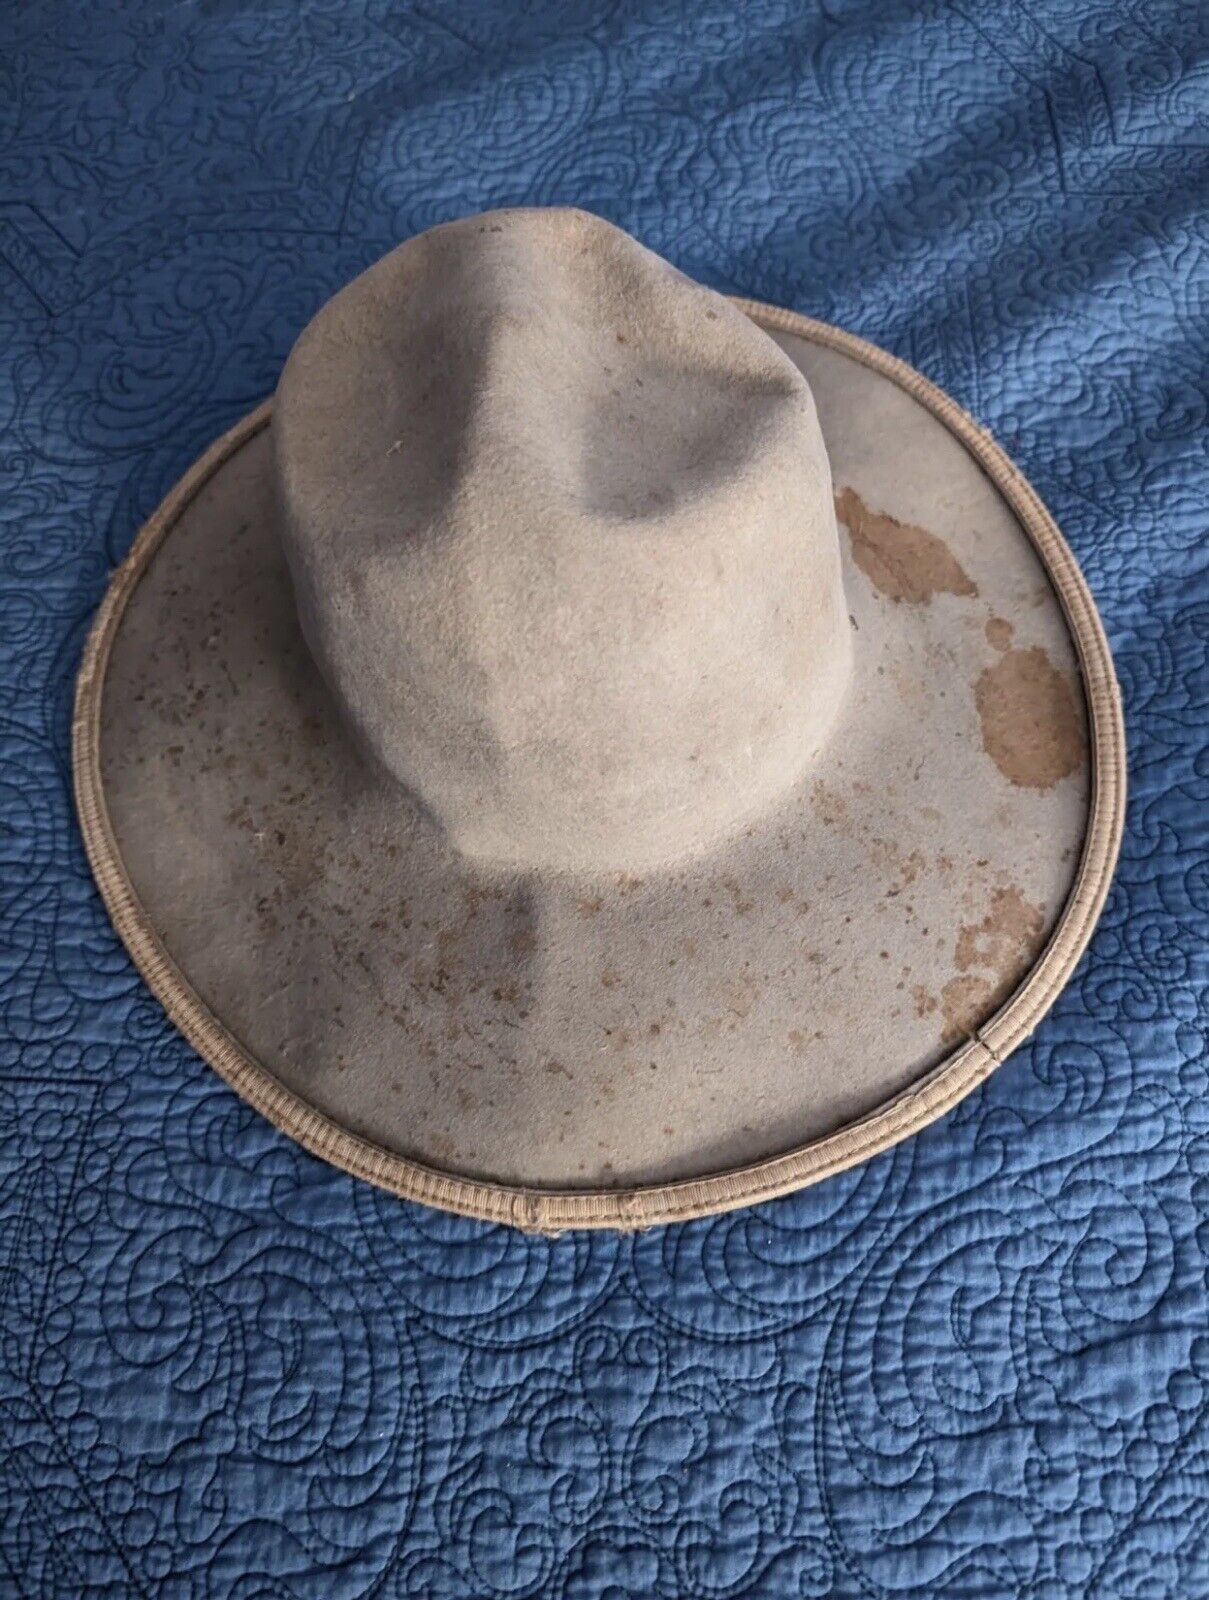 Extremely Rare Old American Wild West Outlaw Lawman Gunslinger Cowboy Hat (1900)